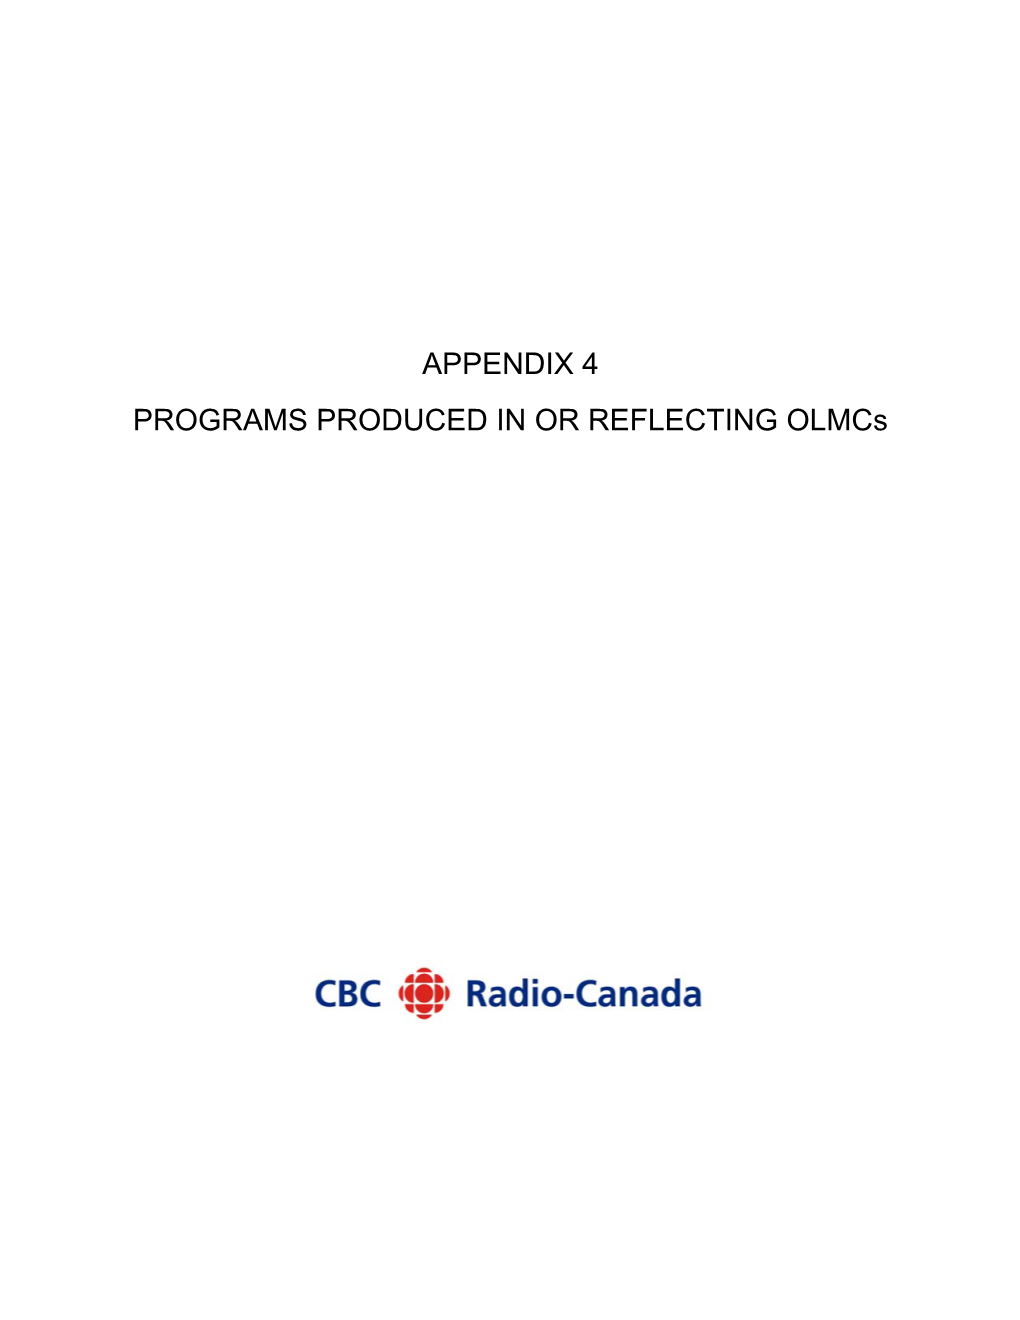 APPENDIX 4 PROGRAMS PRODUCED in OR REFLECTING Olmcs